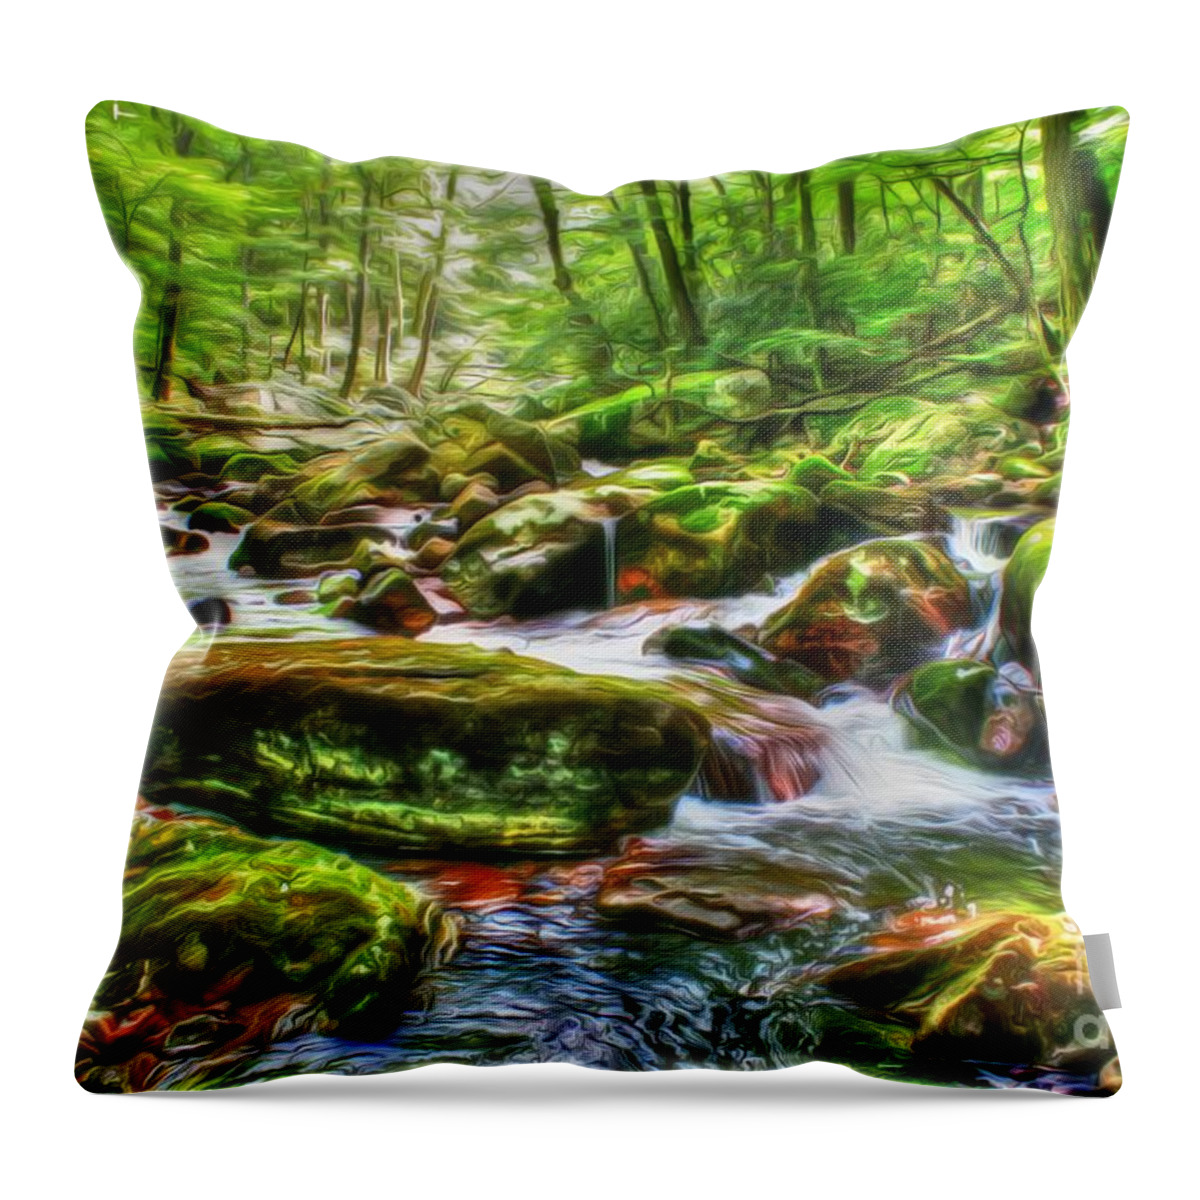 Day Throw Pillow featuring the photograph The Emerald Forest 15 by Dan Stone